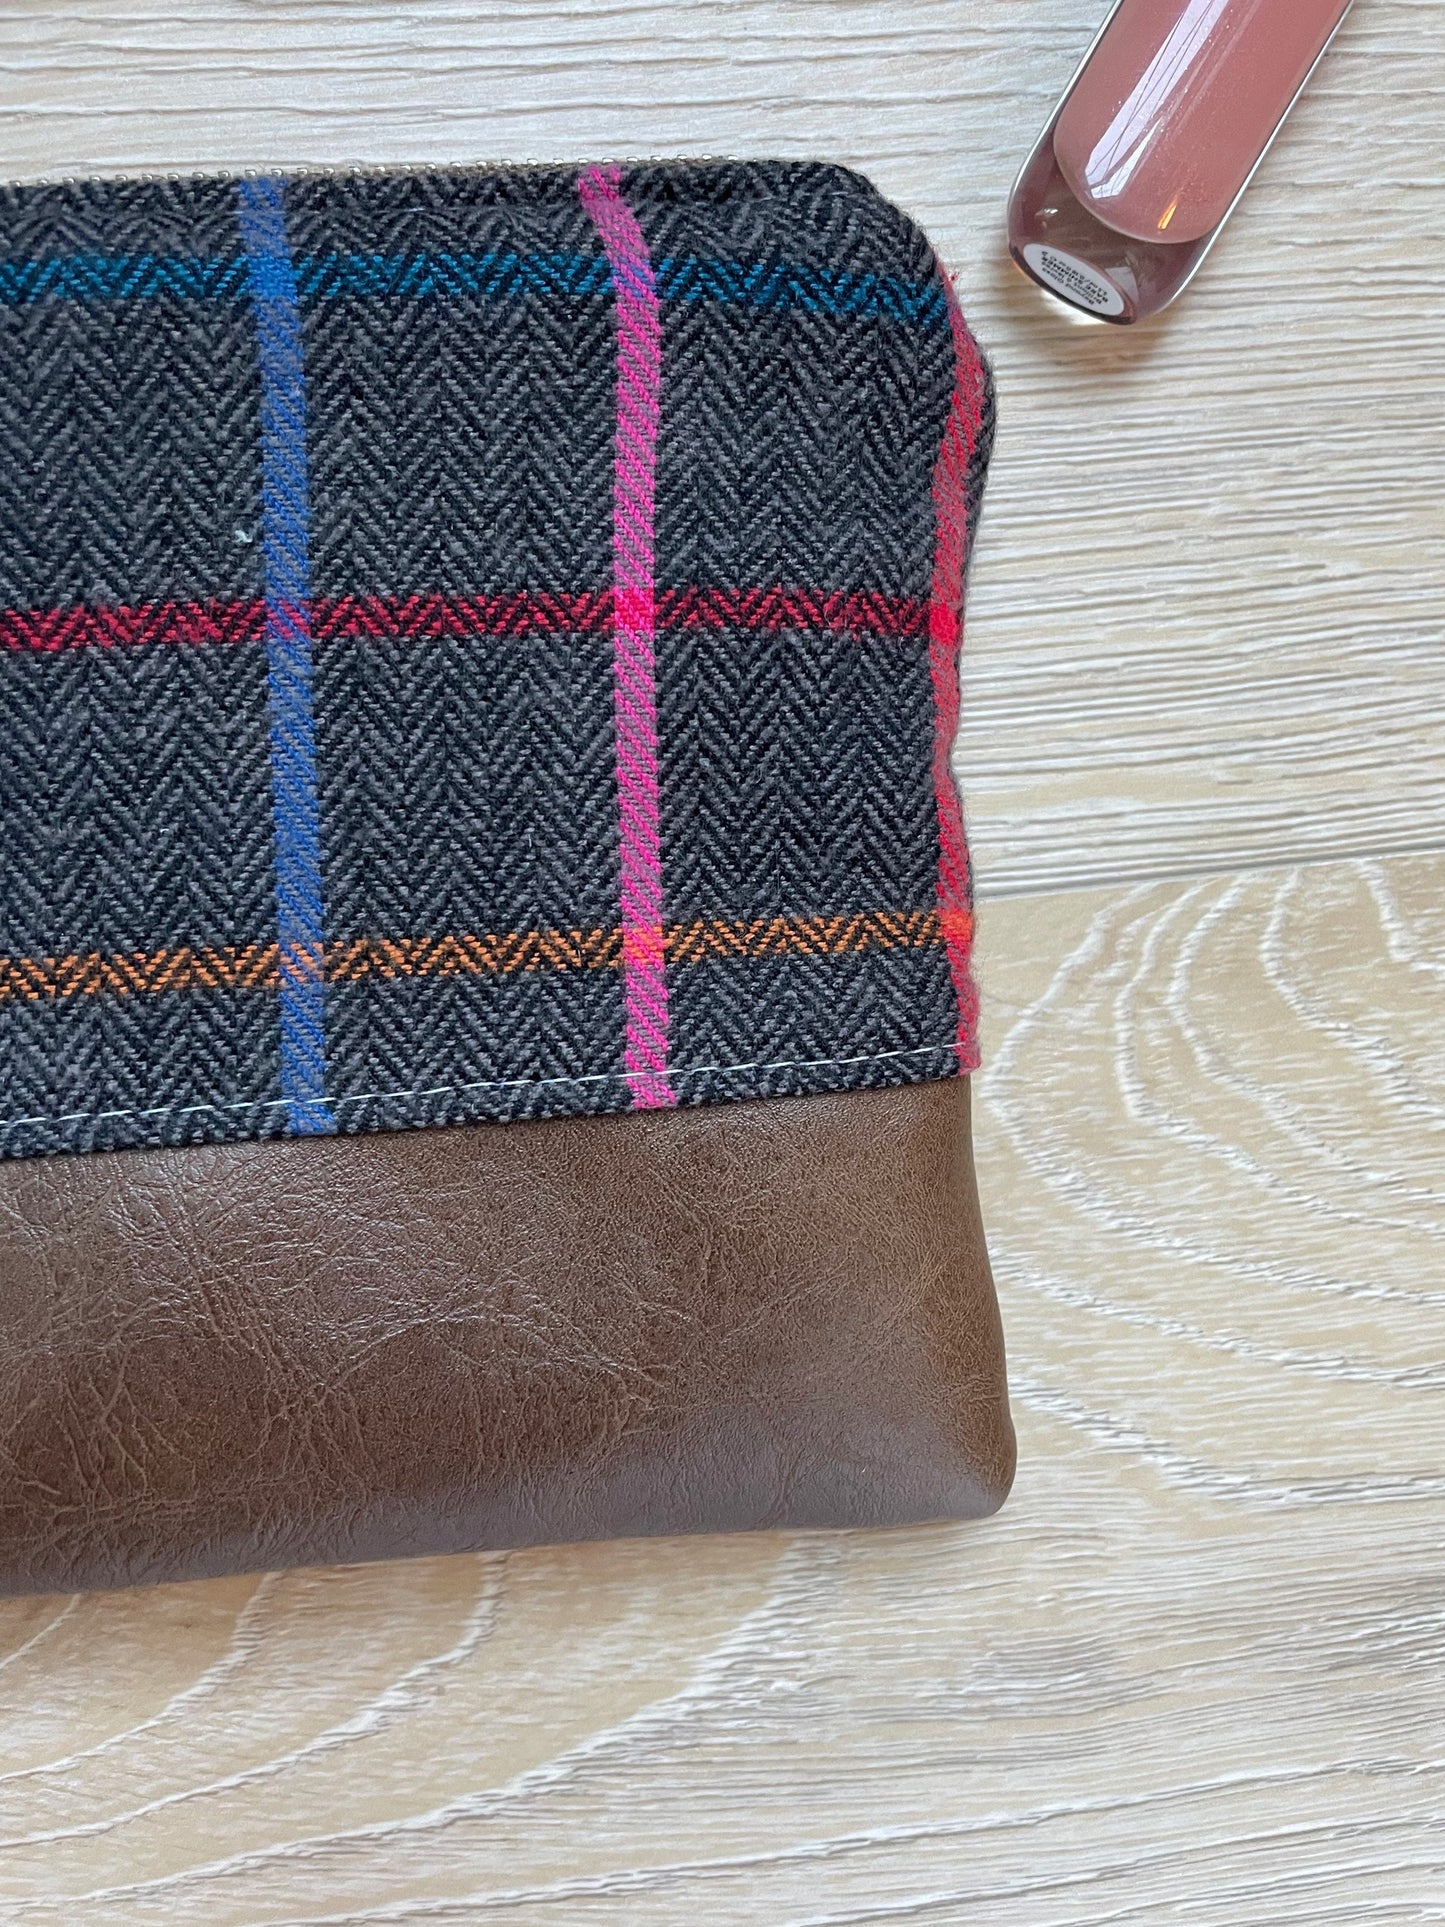 colorful charcoal plaid flannel wristlet with matching wrist strap and brown vinyl along the bottom.